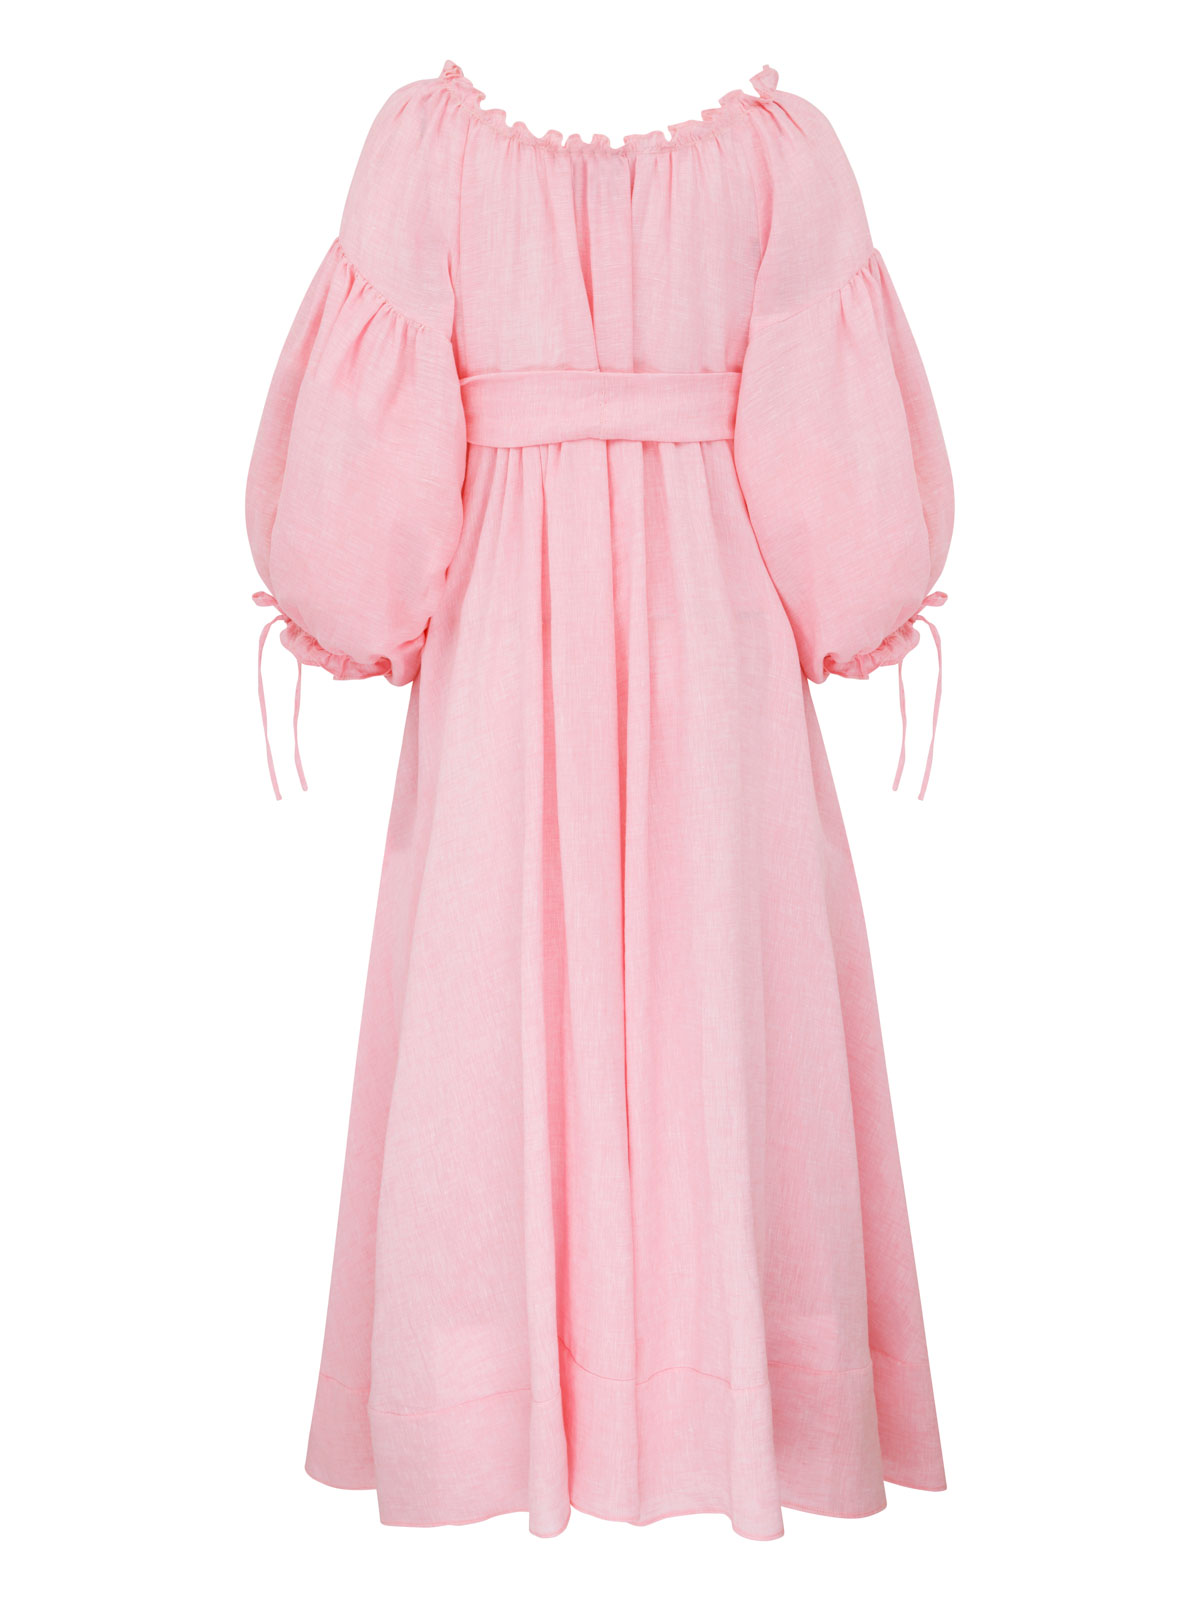 Cafe Society The Countess Dress Peony Pink - Lisa The Label